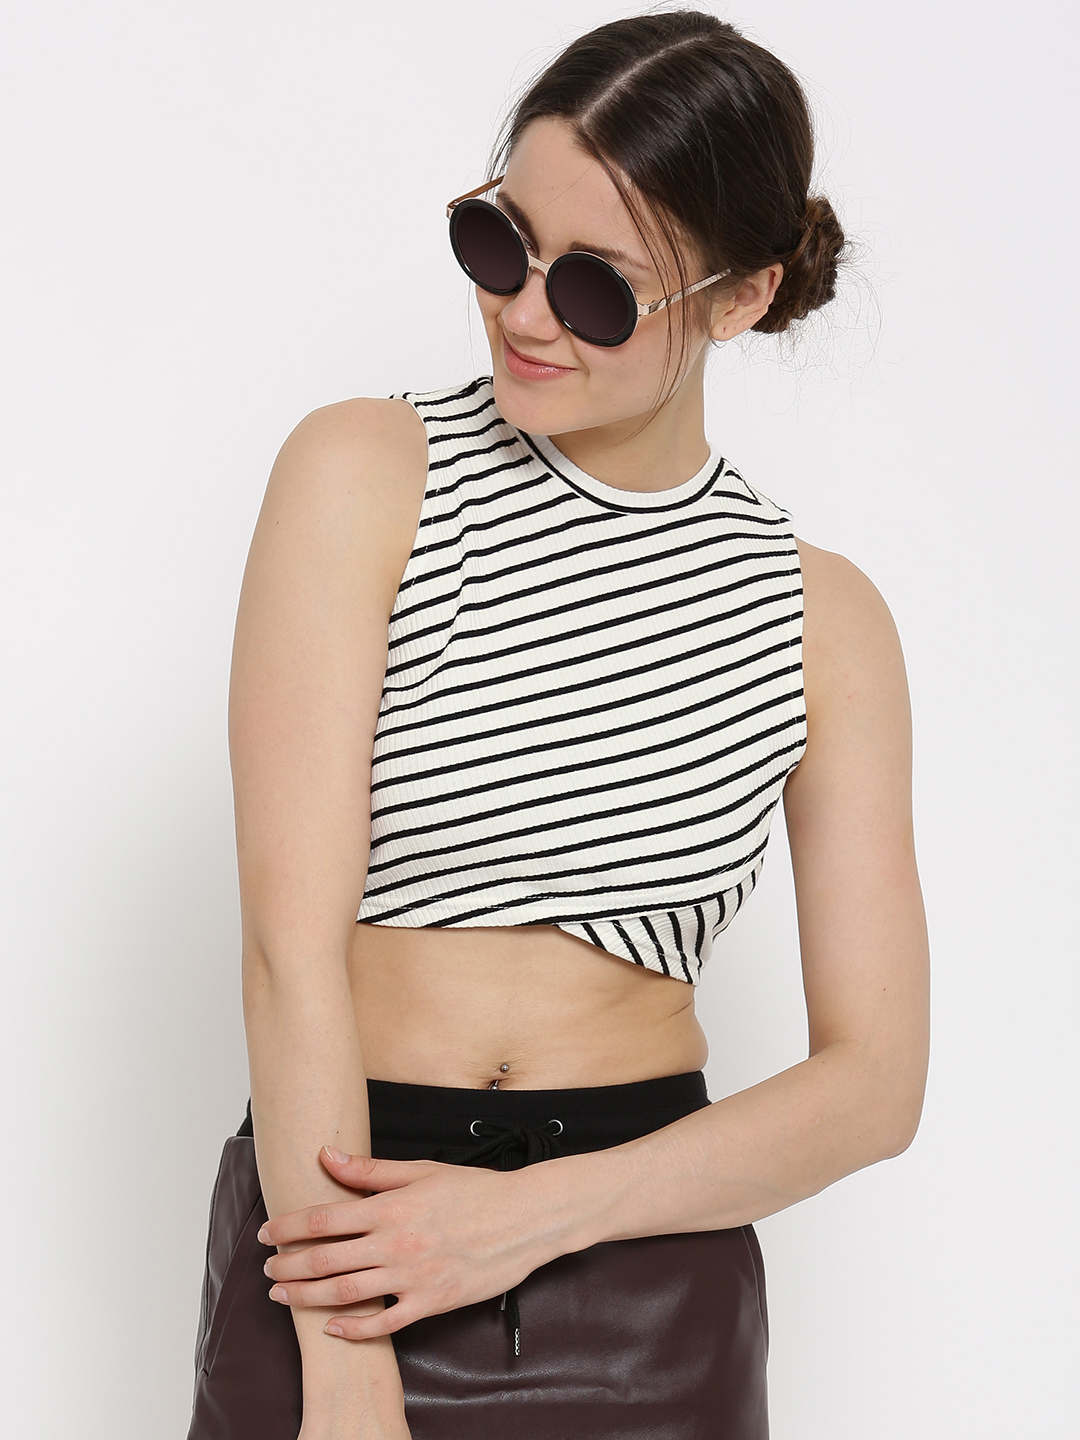 FOREVER 21 Women White & Black Striped Crop Top